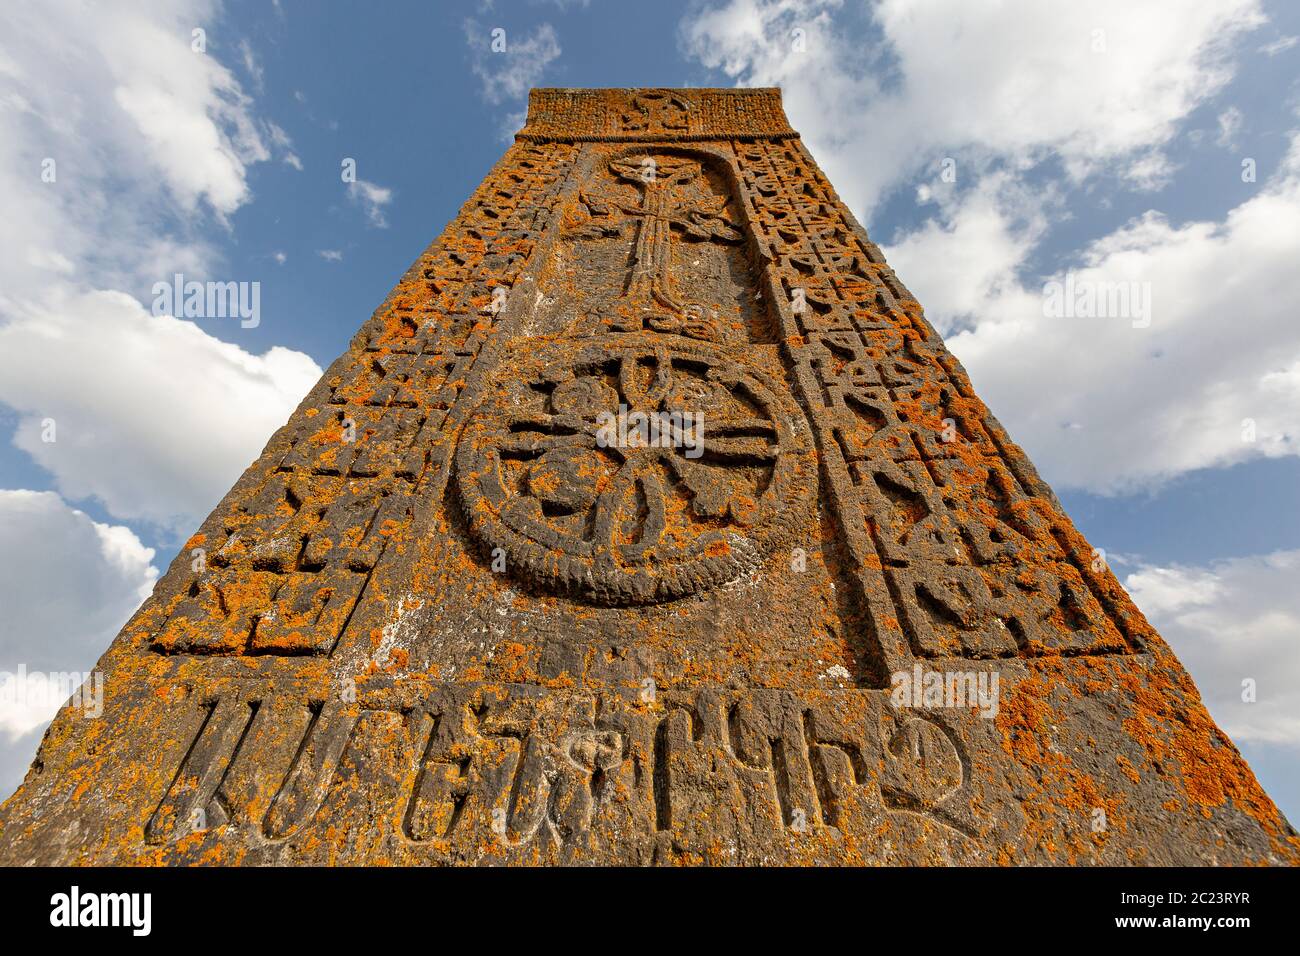 Ancient tombs and headstones known as Khachkar, in the historical cemetery of Noratus in Armenia. Stock Photo